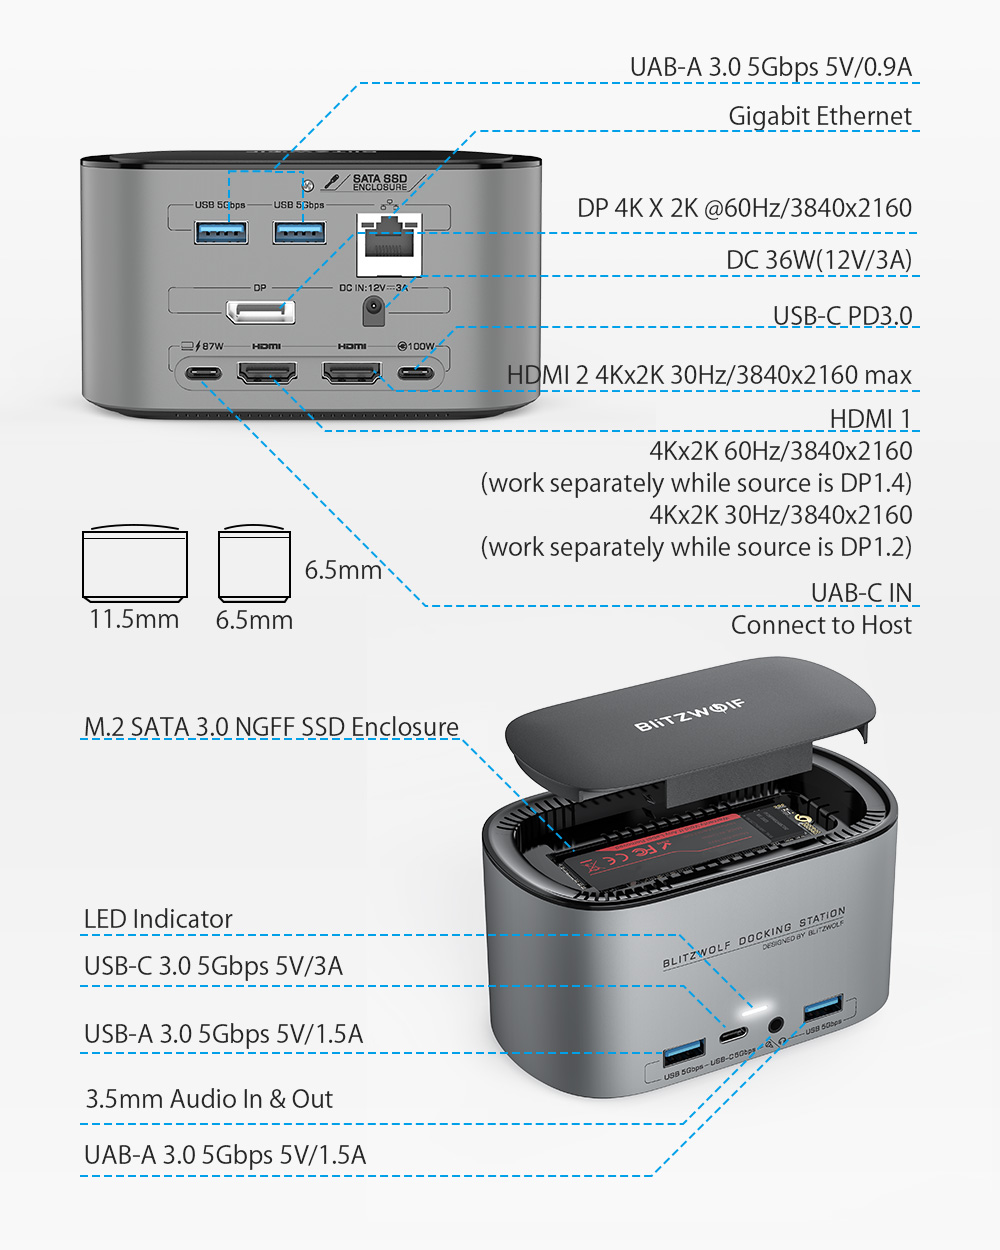 BlitzWolf® BW-TH12 14-in-1 Docking Station with M.2 SATA 3.0 NGFF SSD Enclosure HD 4K/60HZ Triple Display USB 3.0 1000Mb/s RJ45 Ethernet Interface